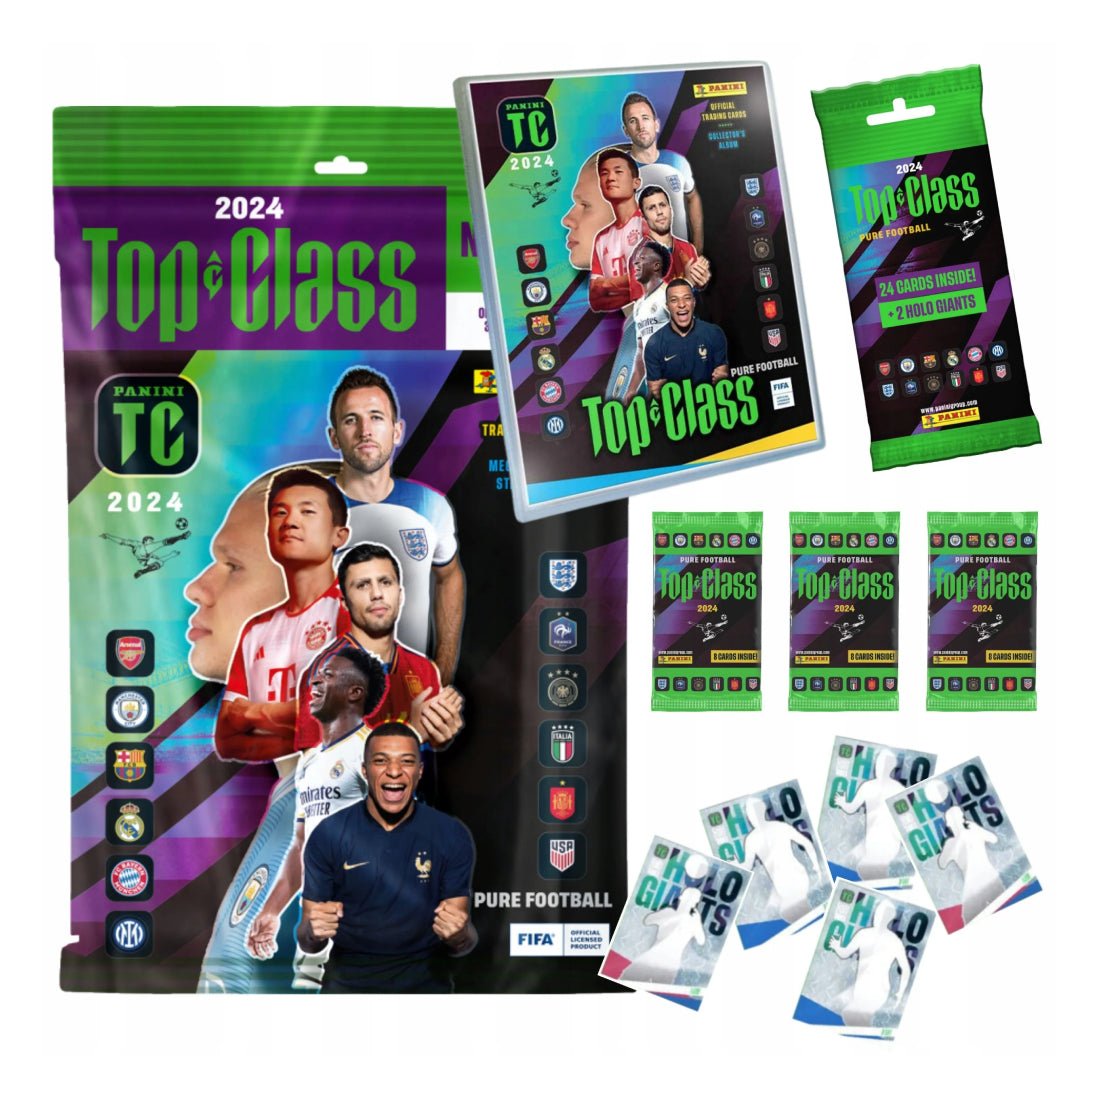 Panini Card Packets Top Class 24 FIFA Starter Pack - تجميعة - Store 974 | ستور ٩٧٤